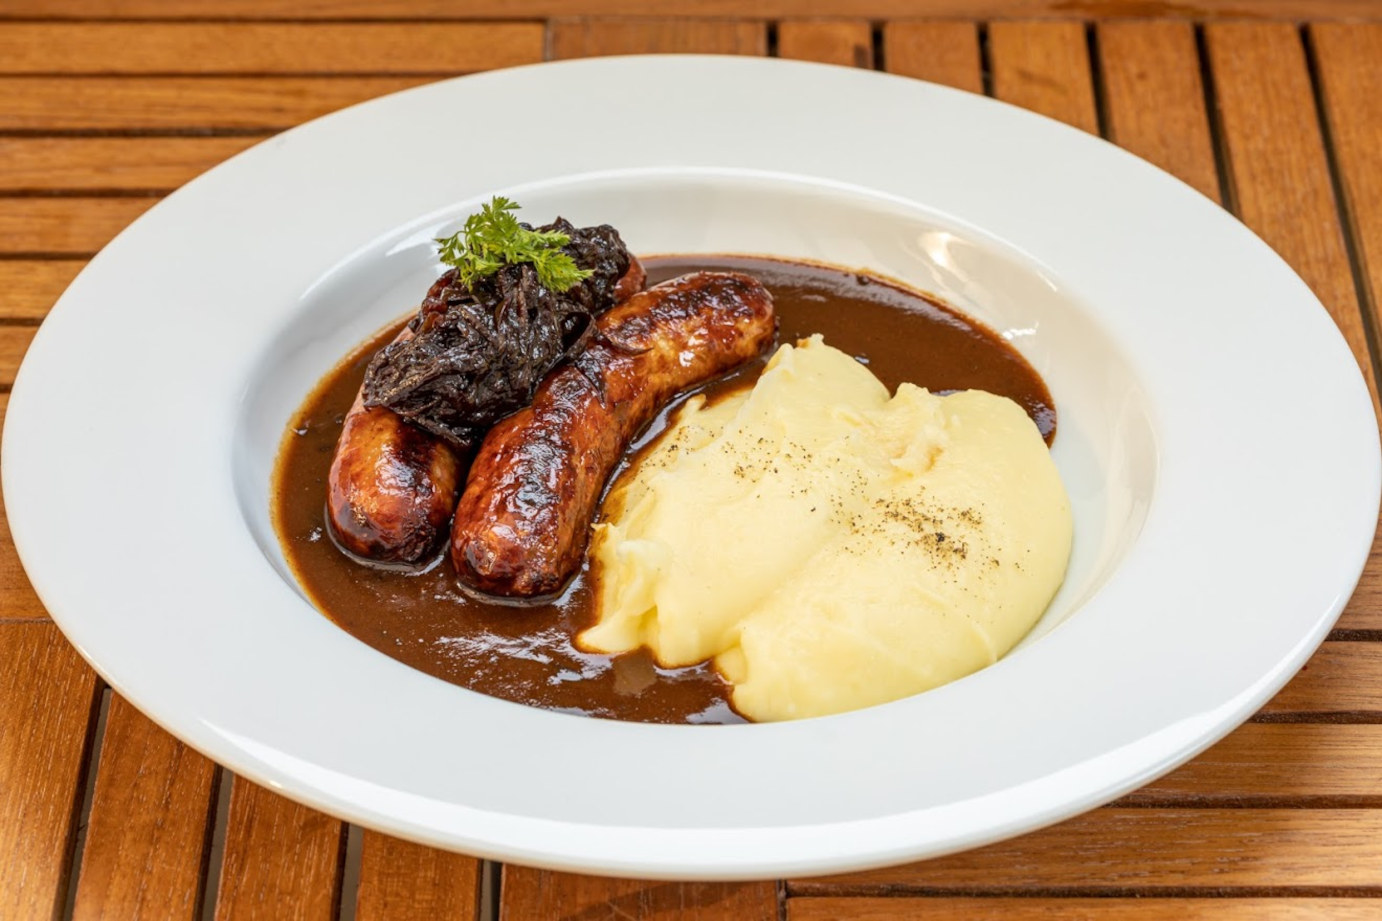 Sausages with mashed potato